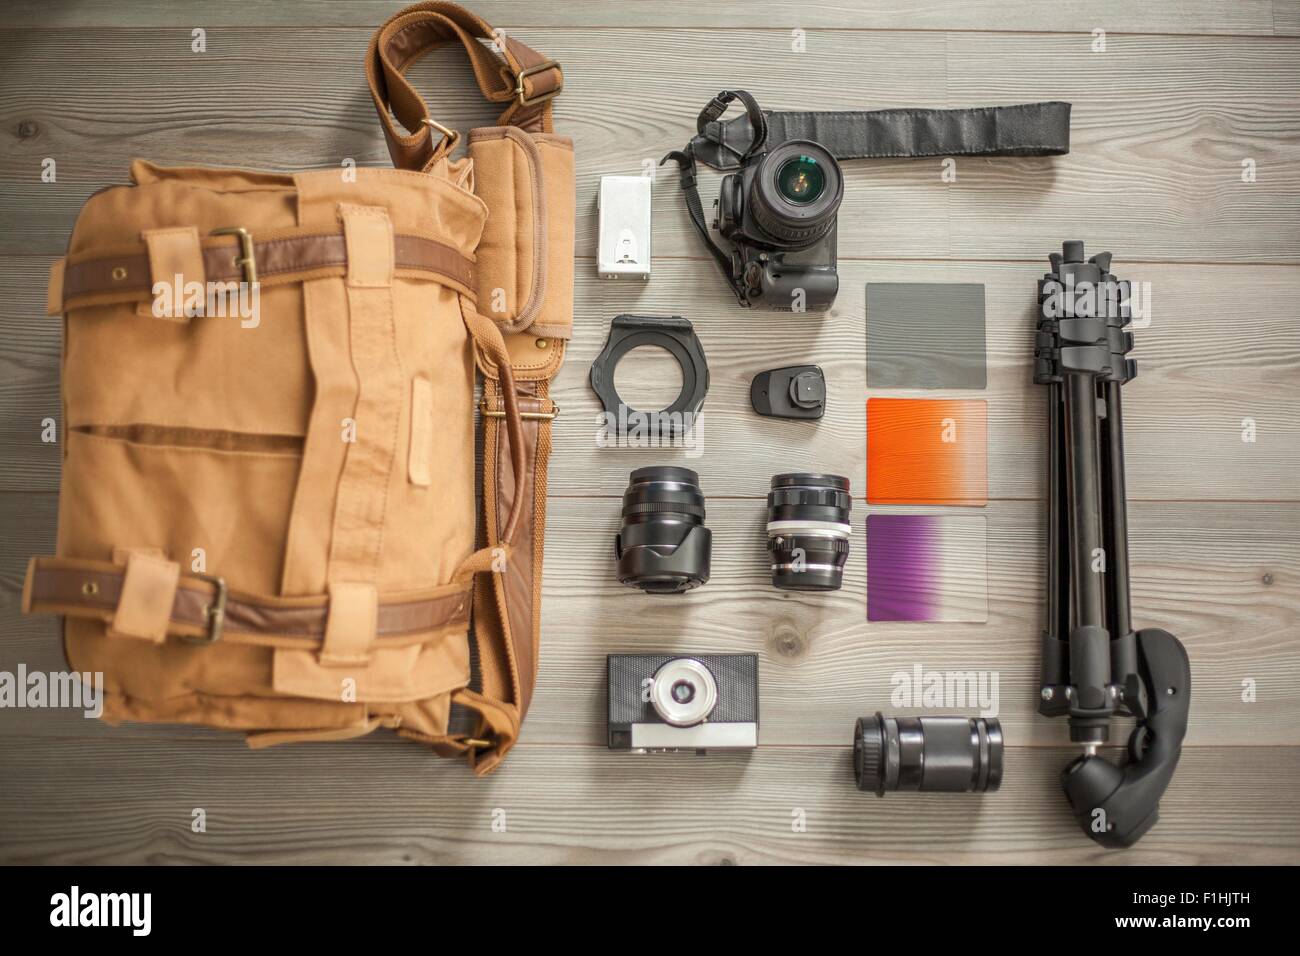 Camera equipment and camera bag arranged on table, overhead view Stock Photo